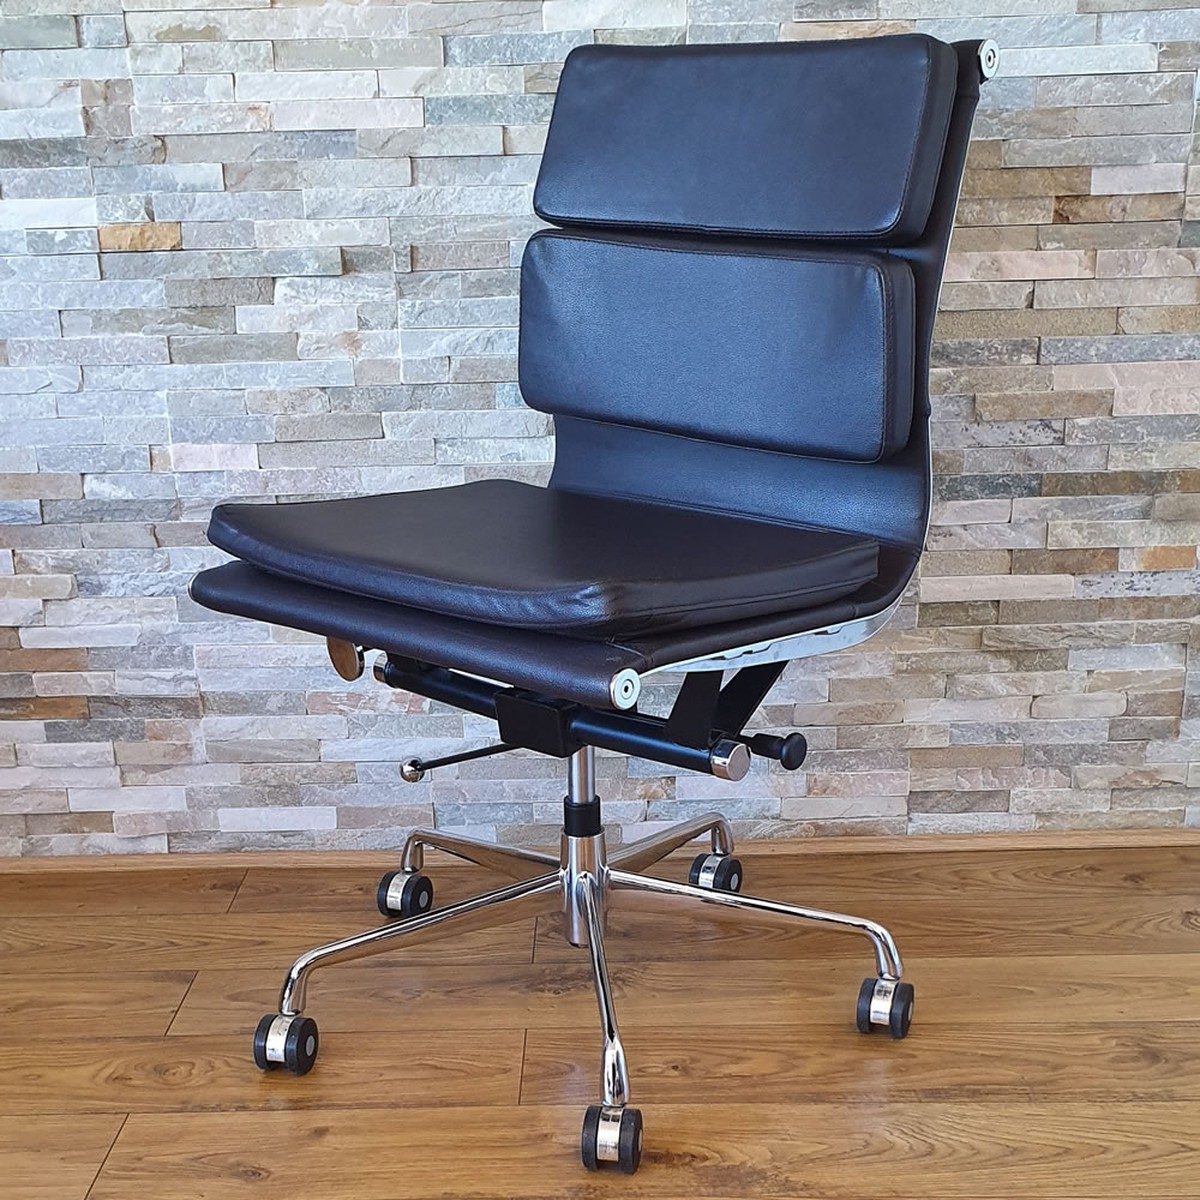 Secondhand Chairs And Tables Office Furniture 50x Eames Style